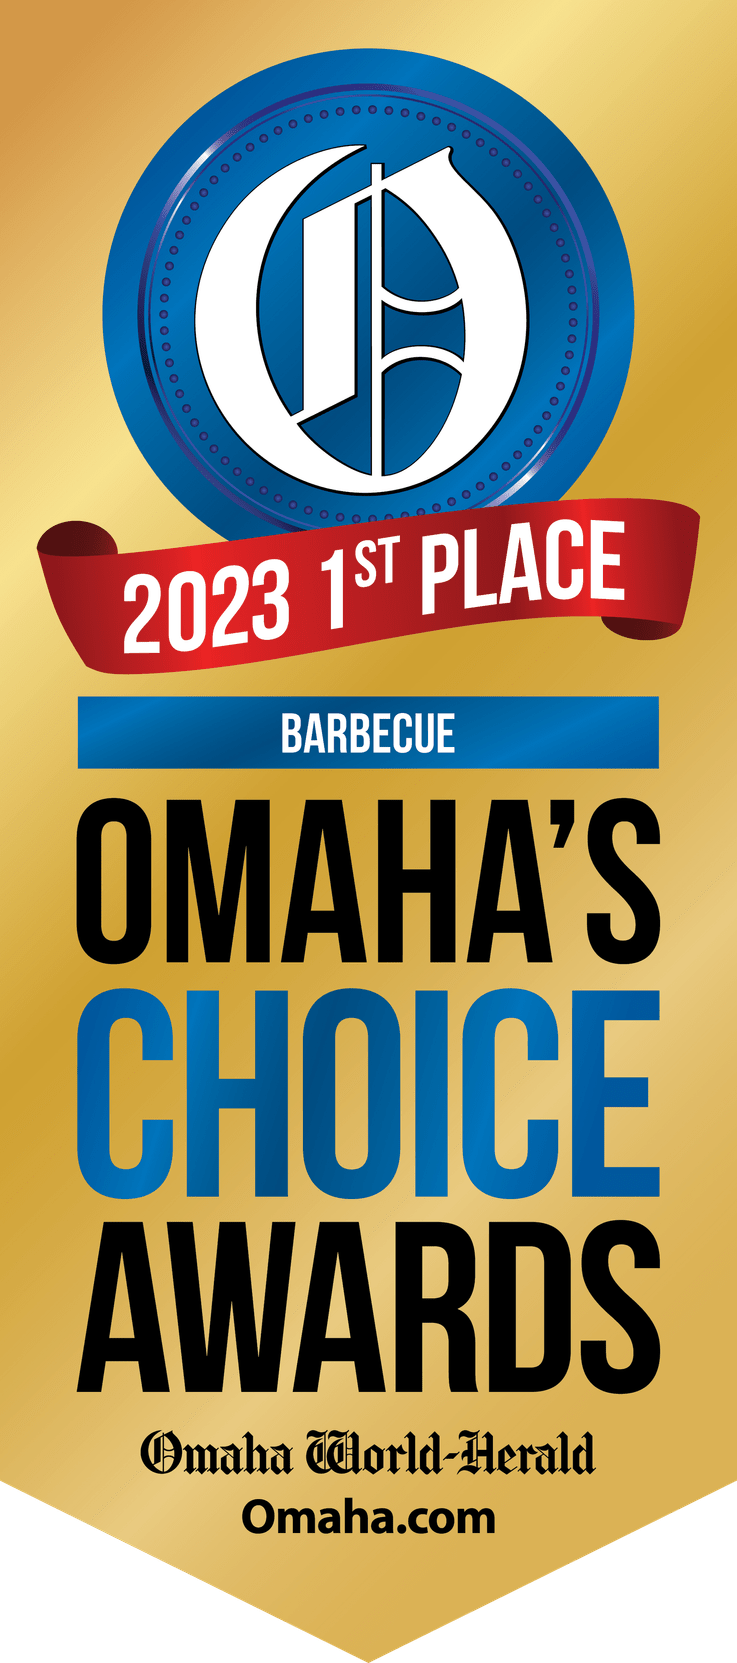 2023. 1st place Barbecue Award